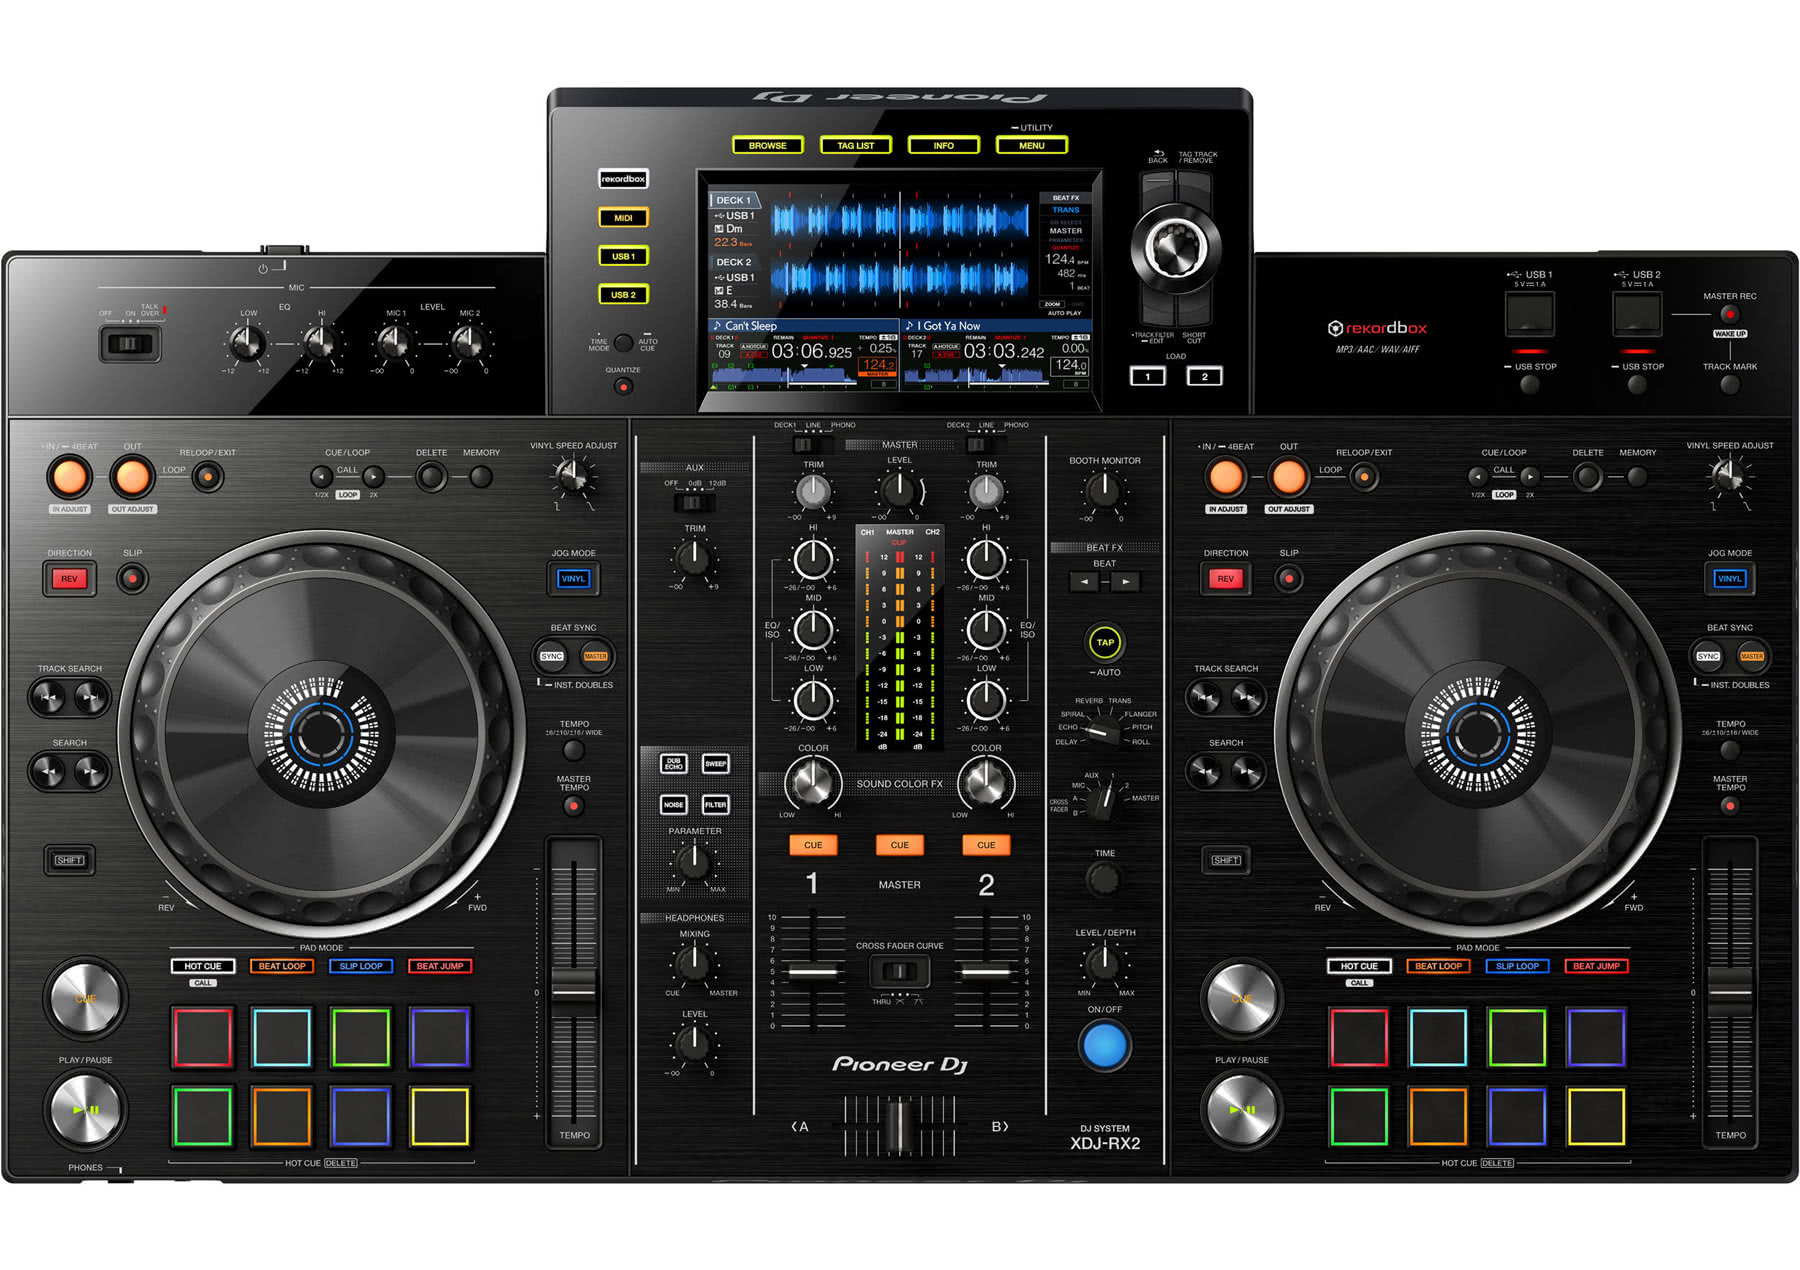 Pioneer XDJ-RX2 all in one controller